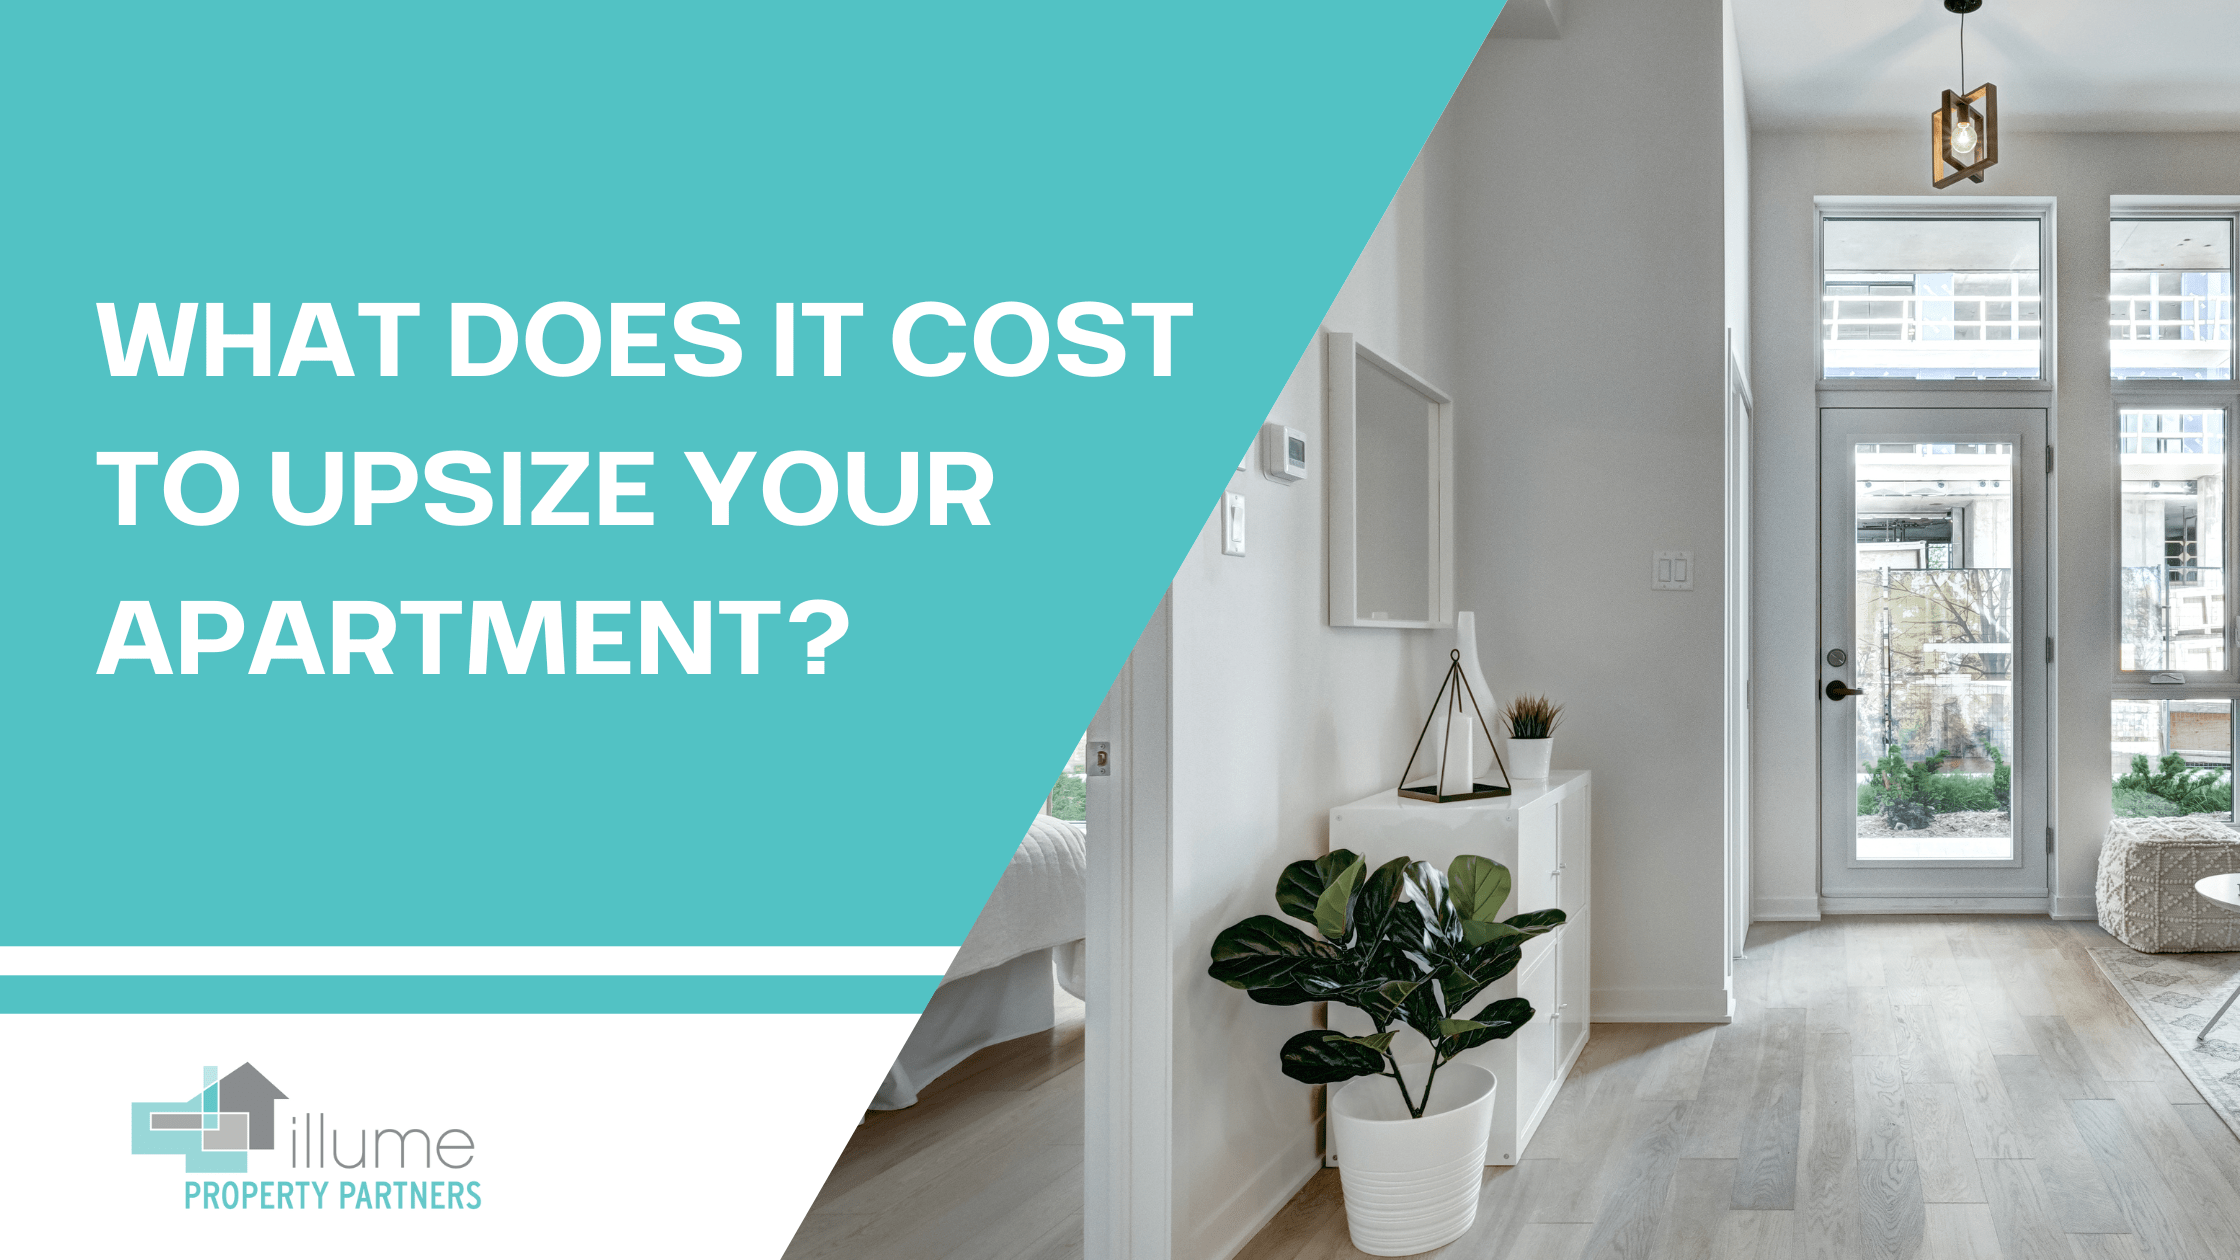 What Does it Cost to Upsize Your Apartment?